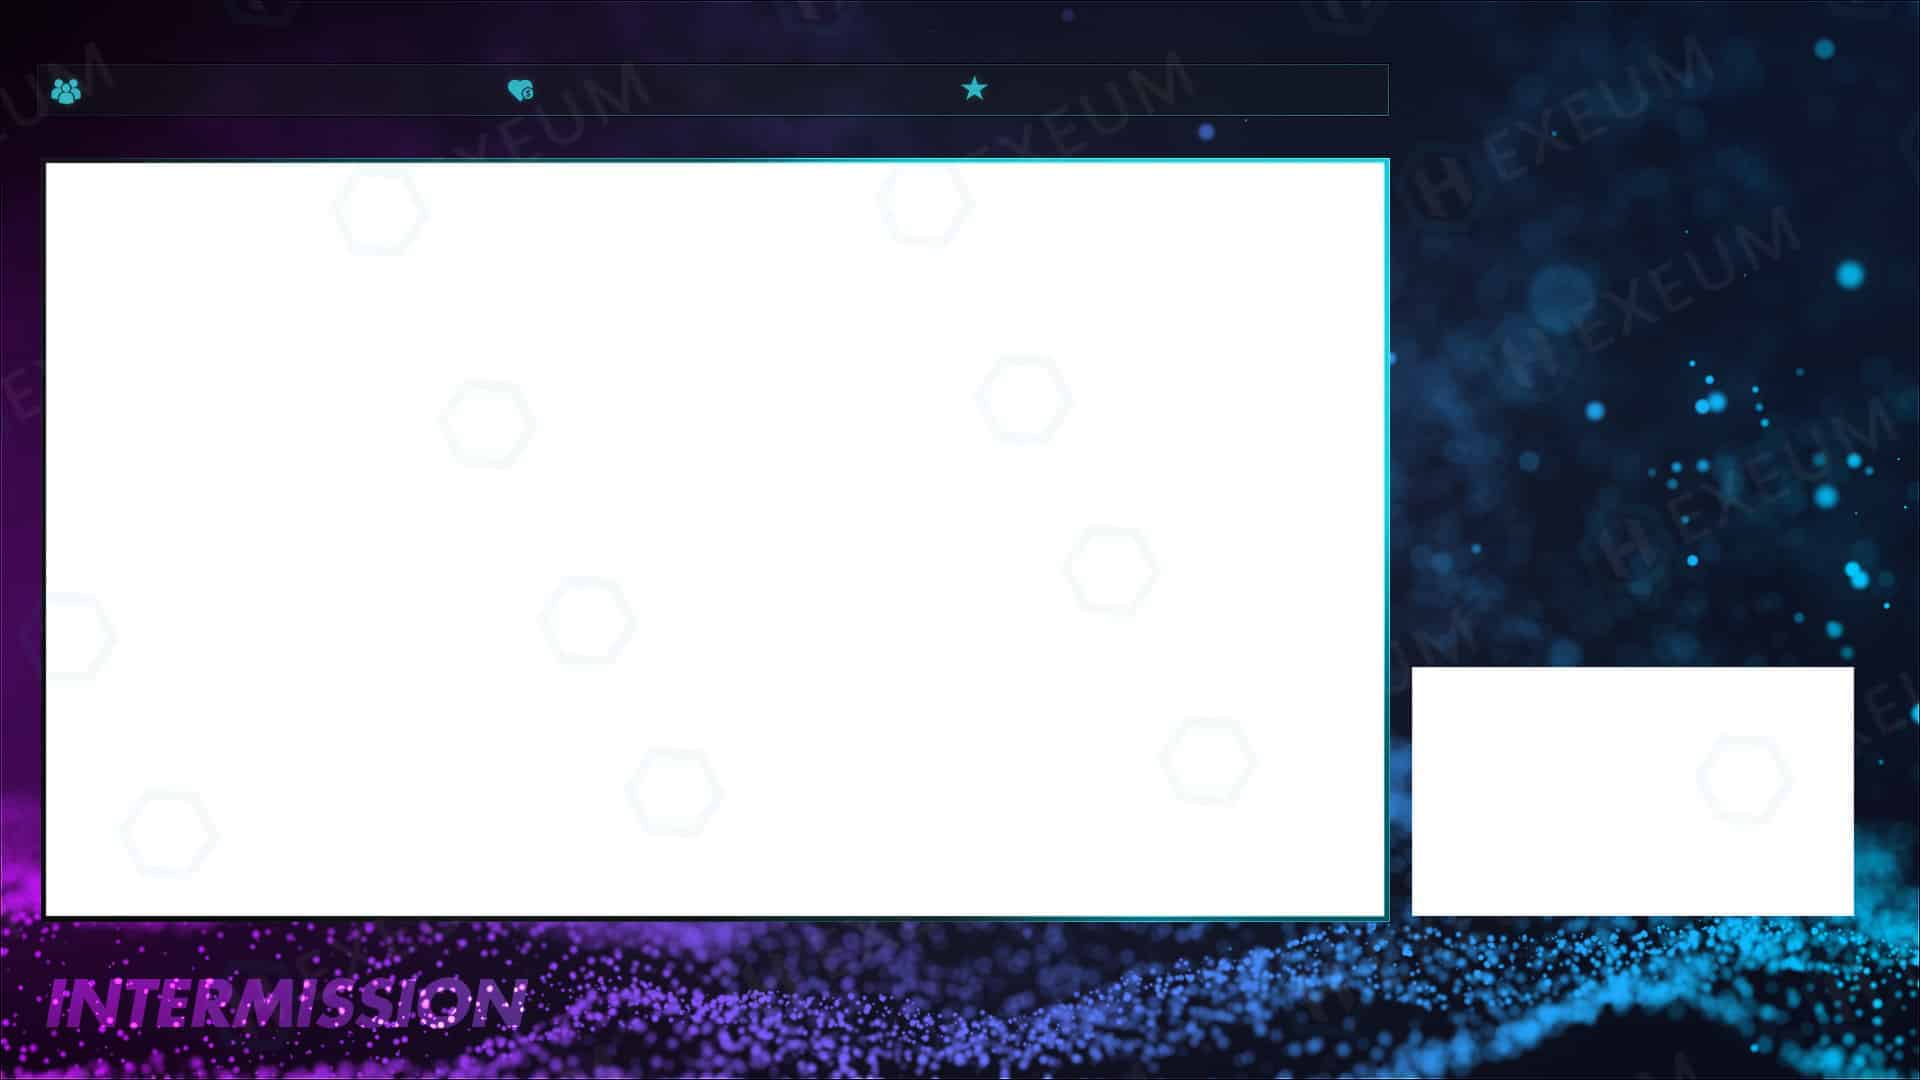 free intermission screen for twitch